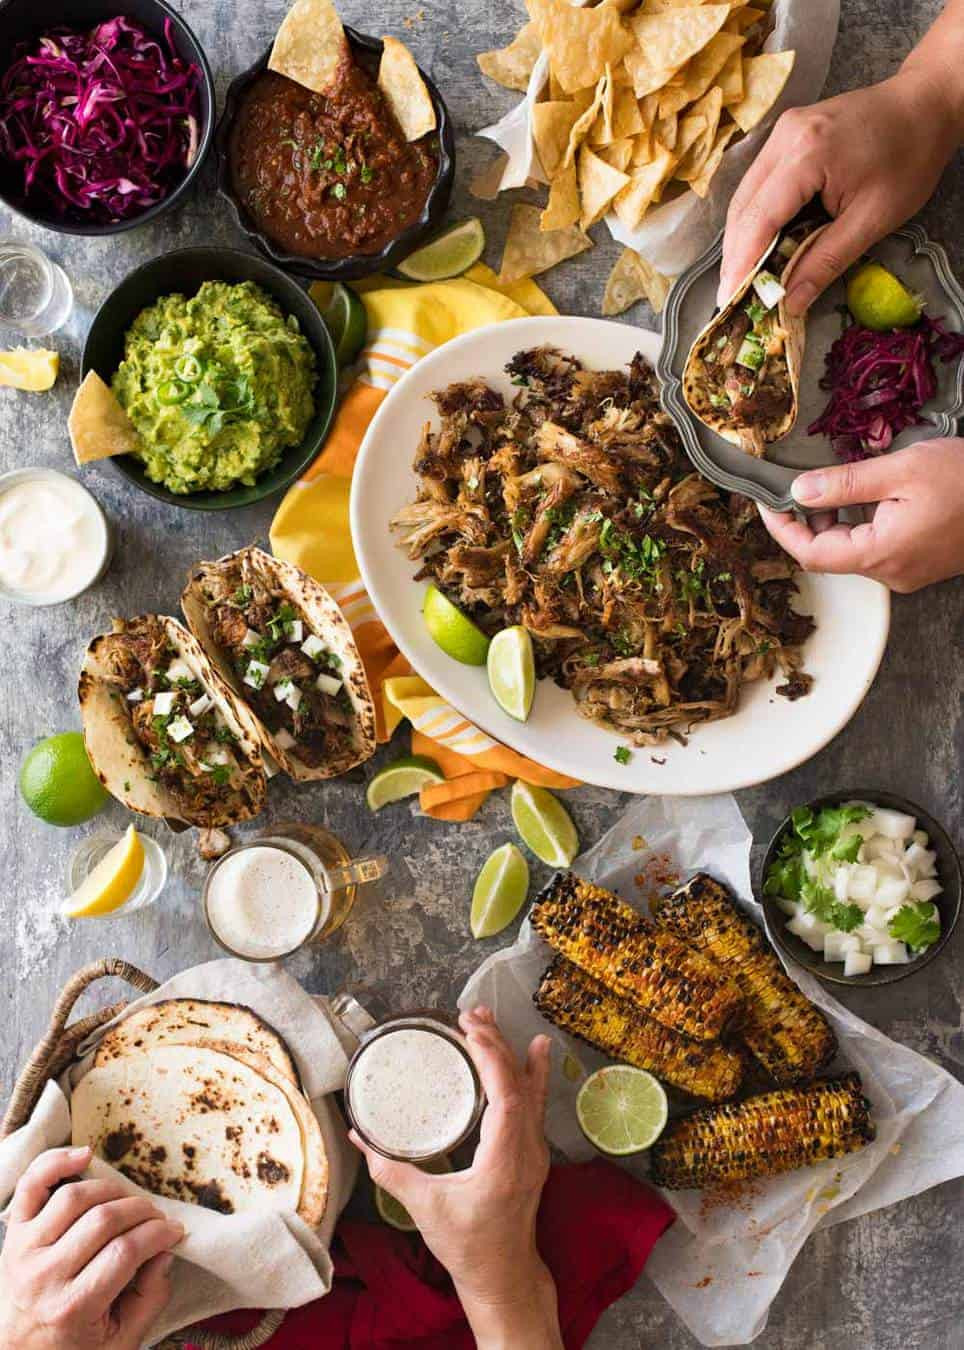 Taco Dinner Party Ideas
 A Big Mexican Fiesta That s Easy to Make